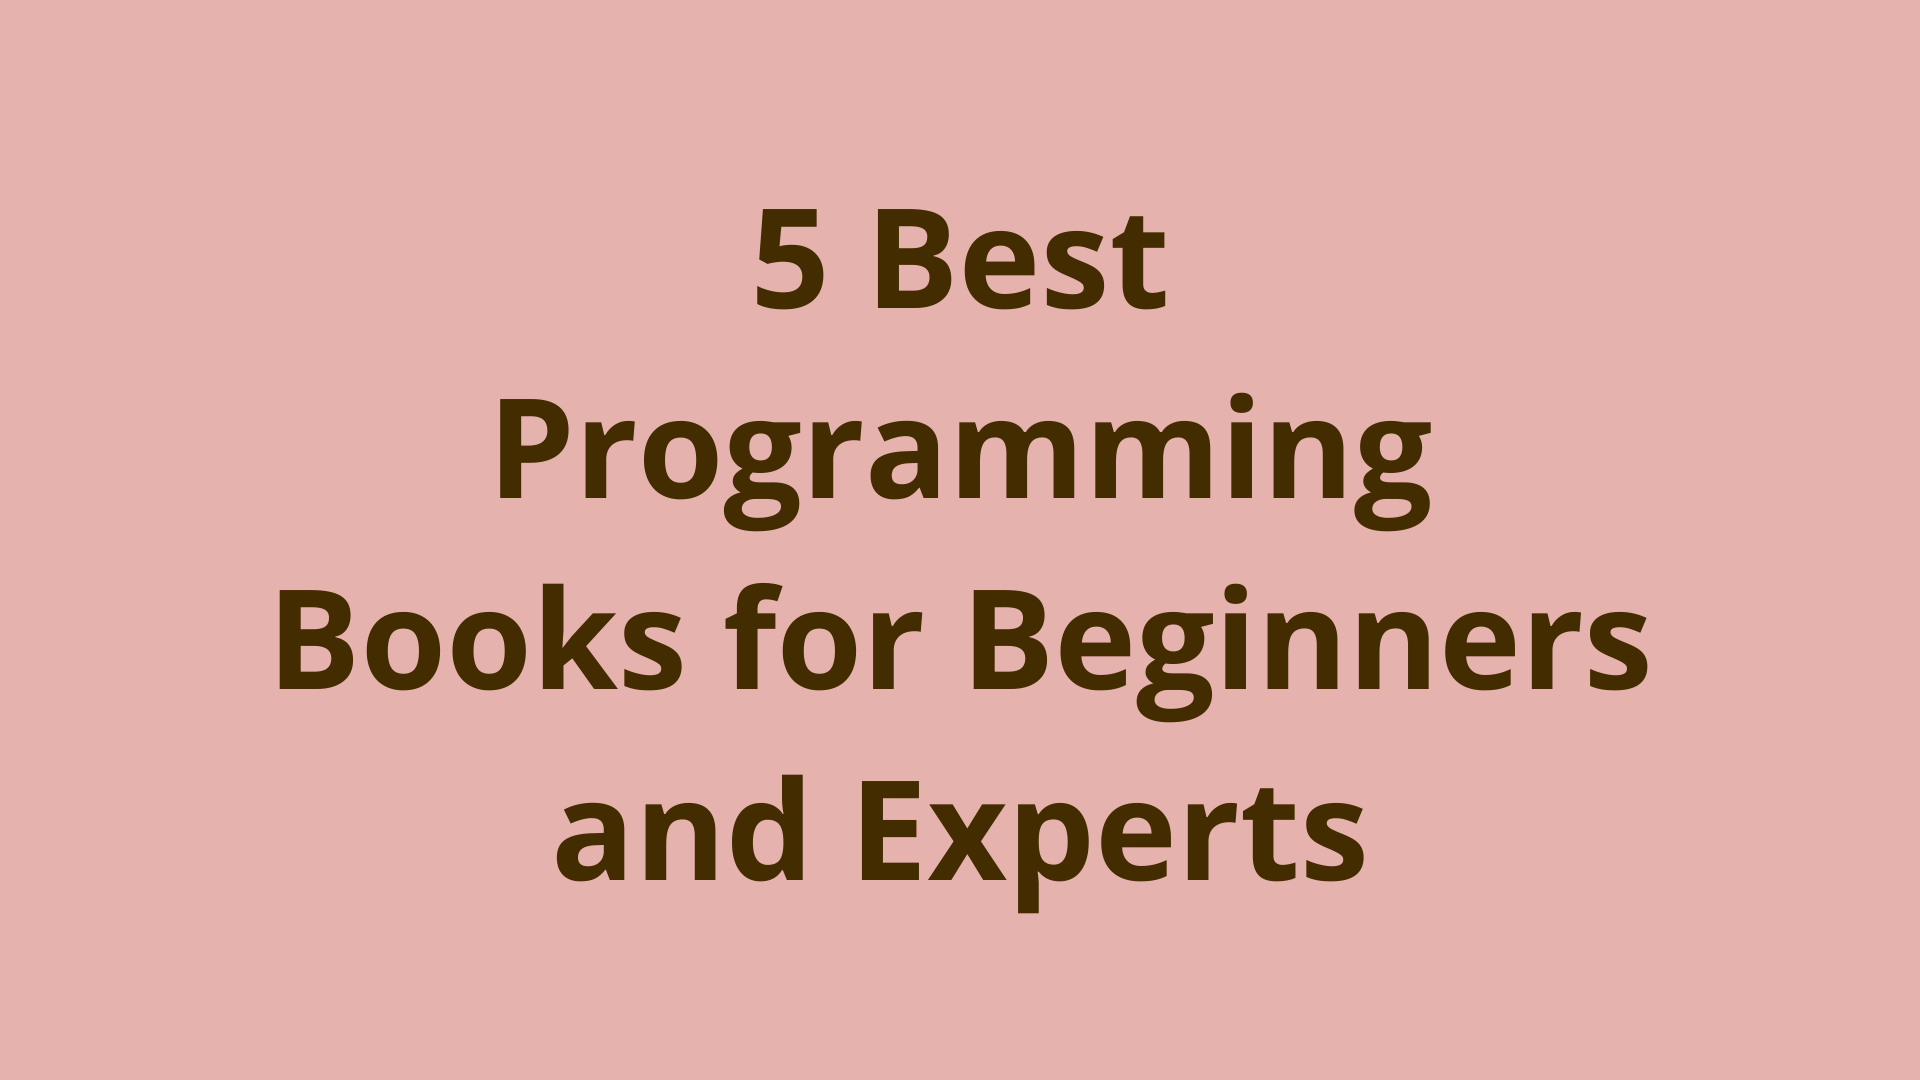 Image of 5 best programming books for beginners and experts in 2019